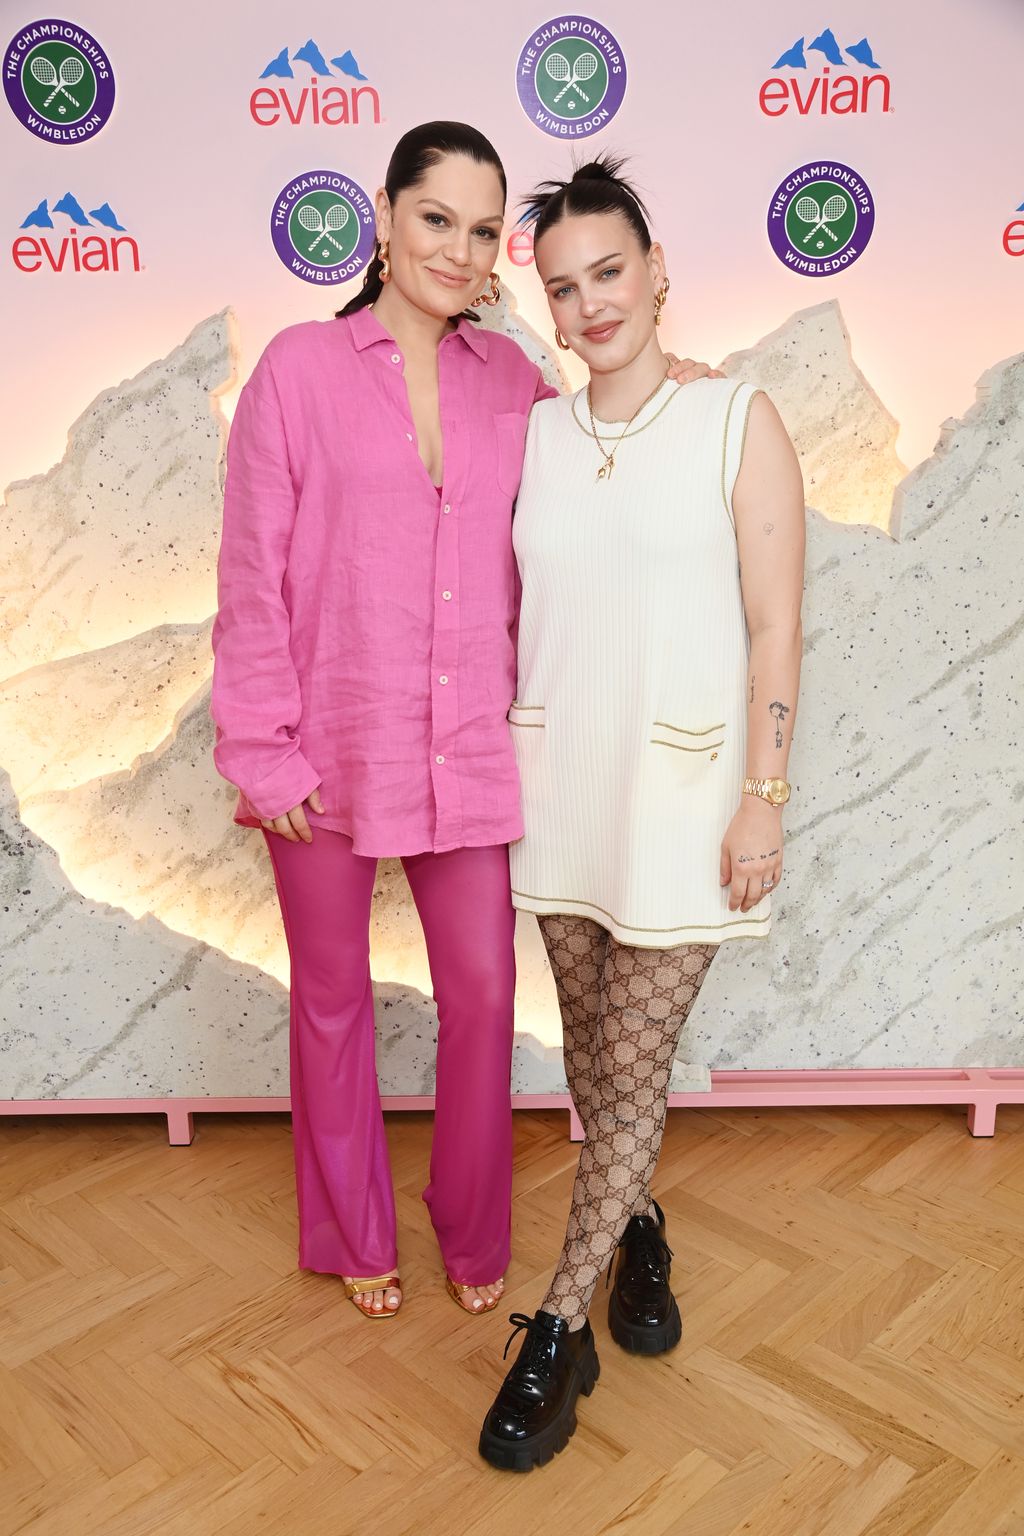 Jessie J opted for total Barbiecore inpink separates, jand Anne-Marie wore a relaxed shite dress with the coolest Gucci tights.